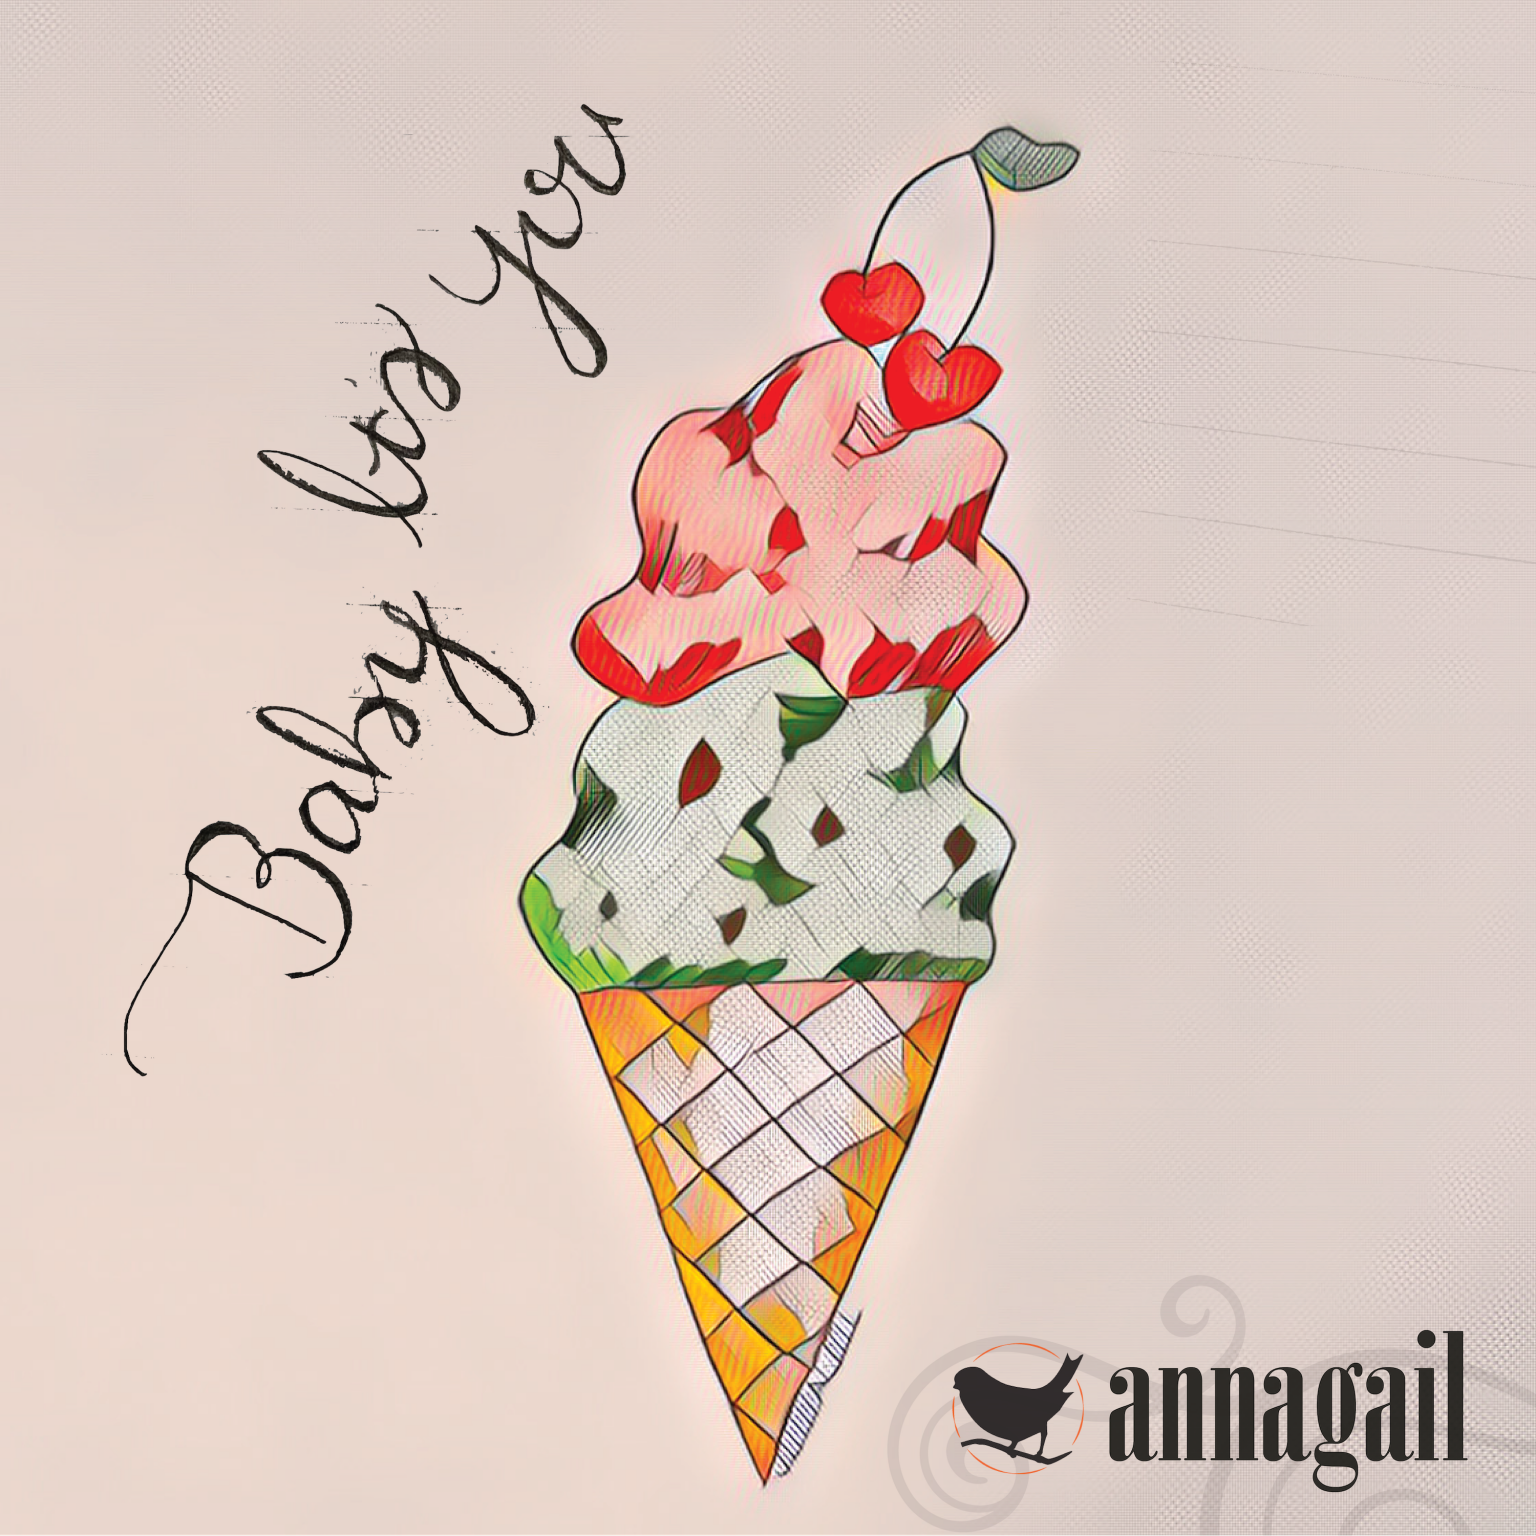 Annagail's album cover for Baby Its You - featuring an ice cream cone